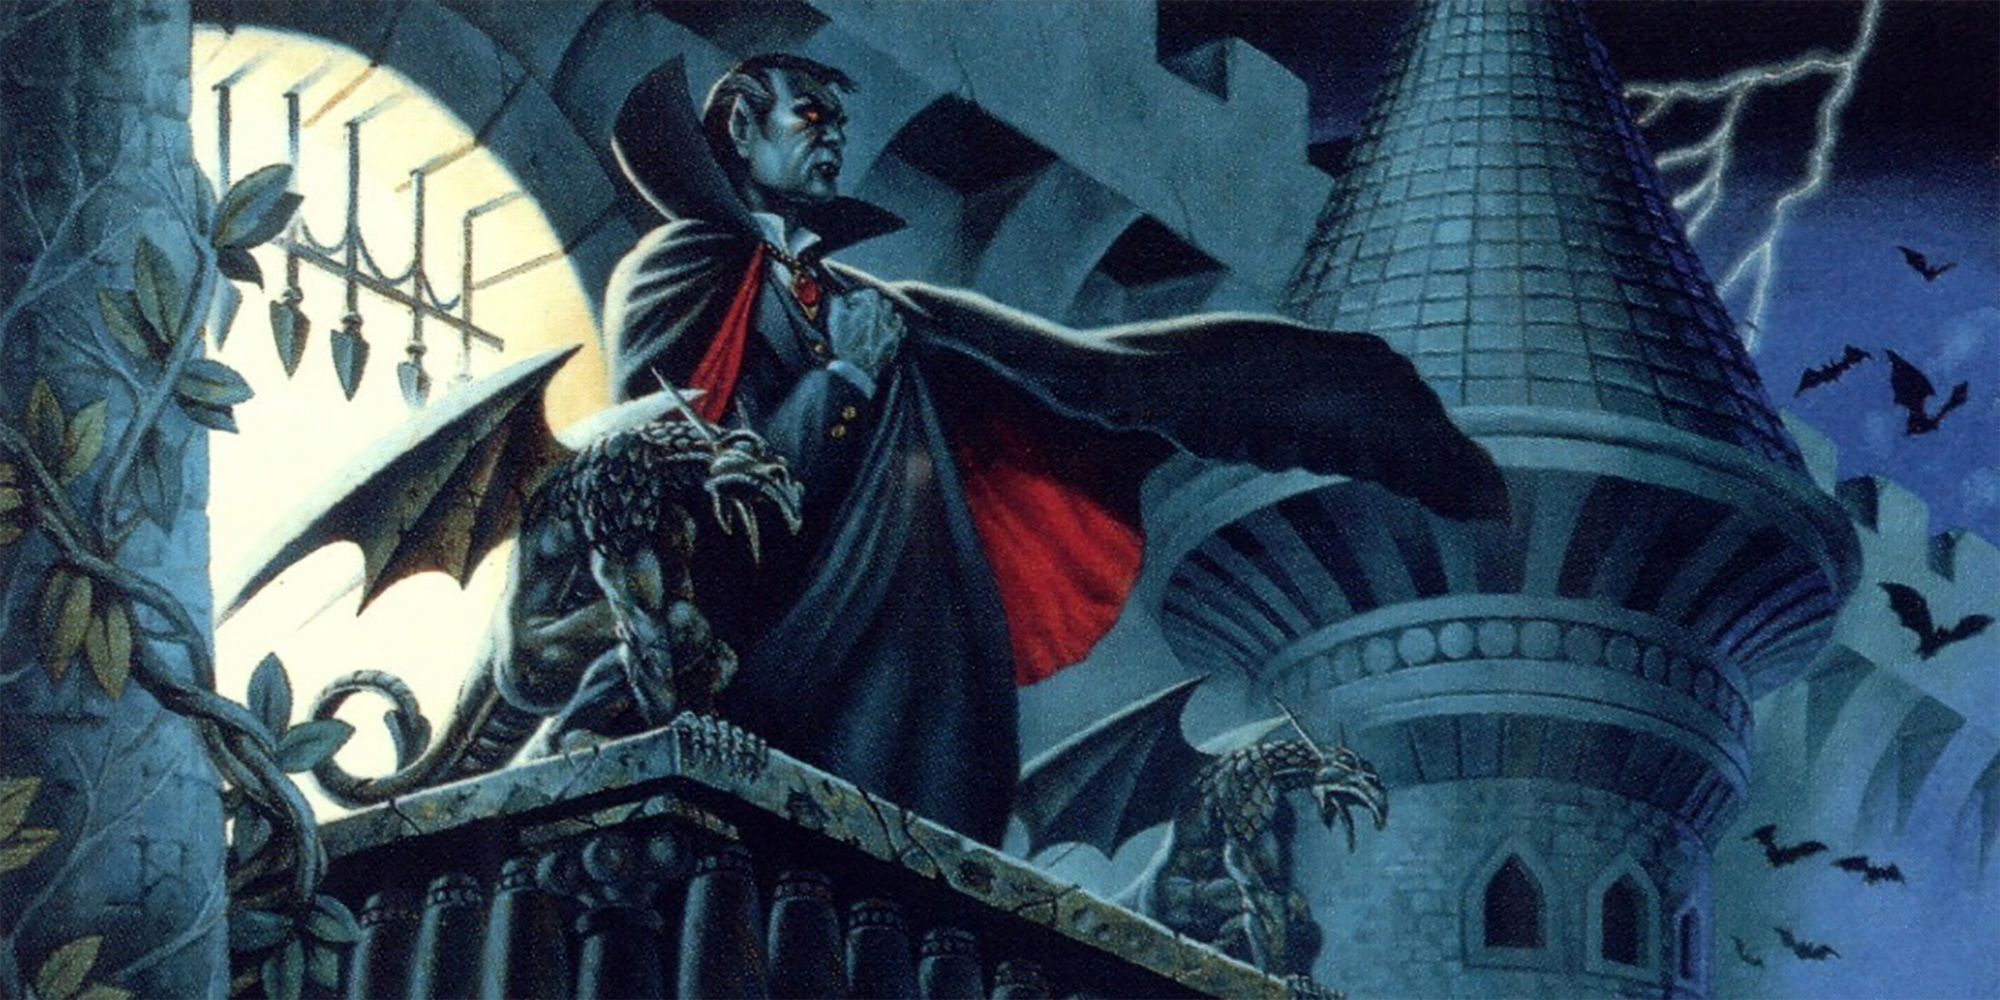 count strahd von zarovich looming on his balcony in dnd